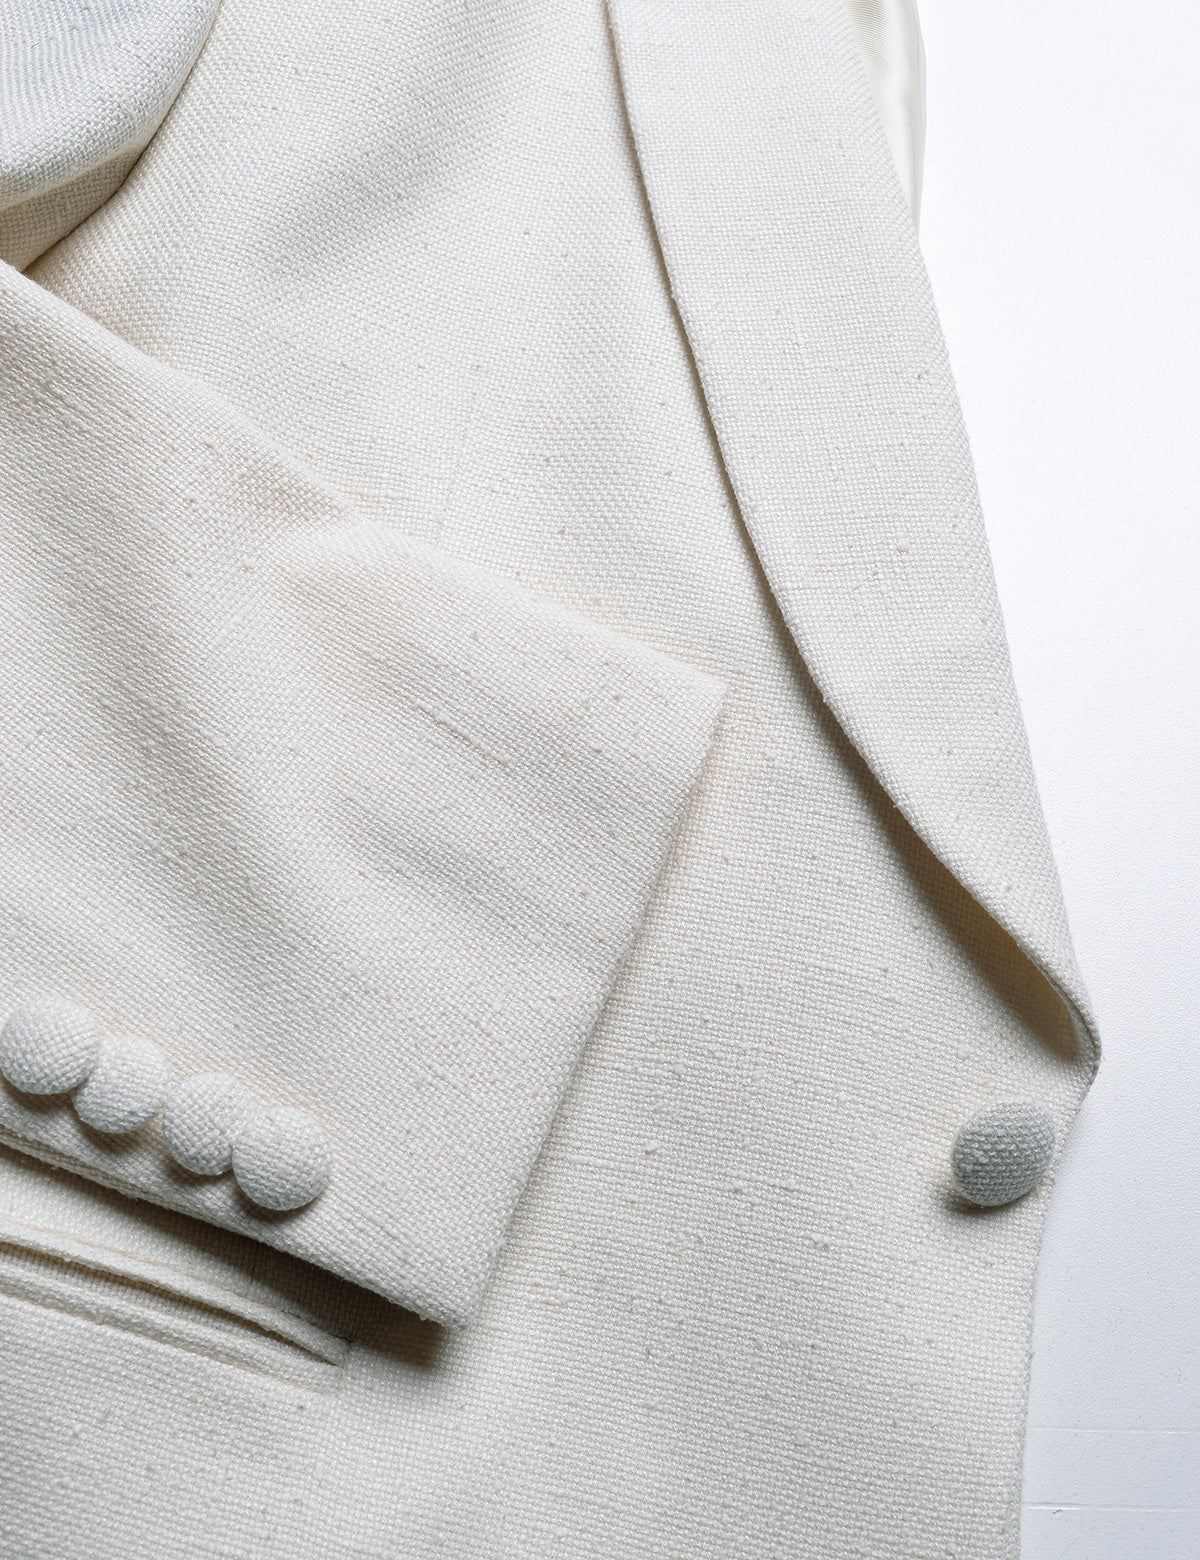 Detail shot of Brooklyn Tailors BKT50 Shawl Collar Dinner Jacket in Silk & Wool Hopsack - Ivory showing cuff, lapel and button